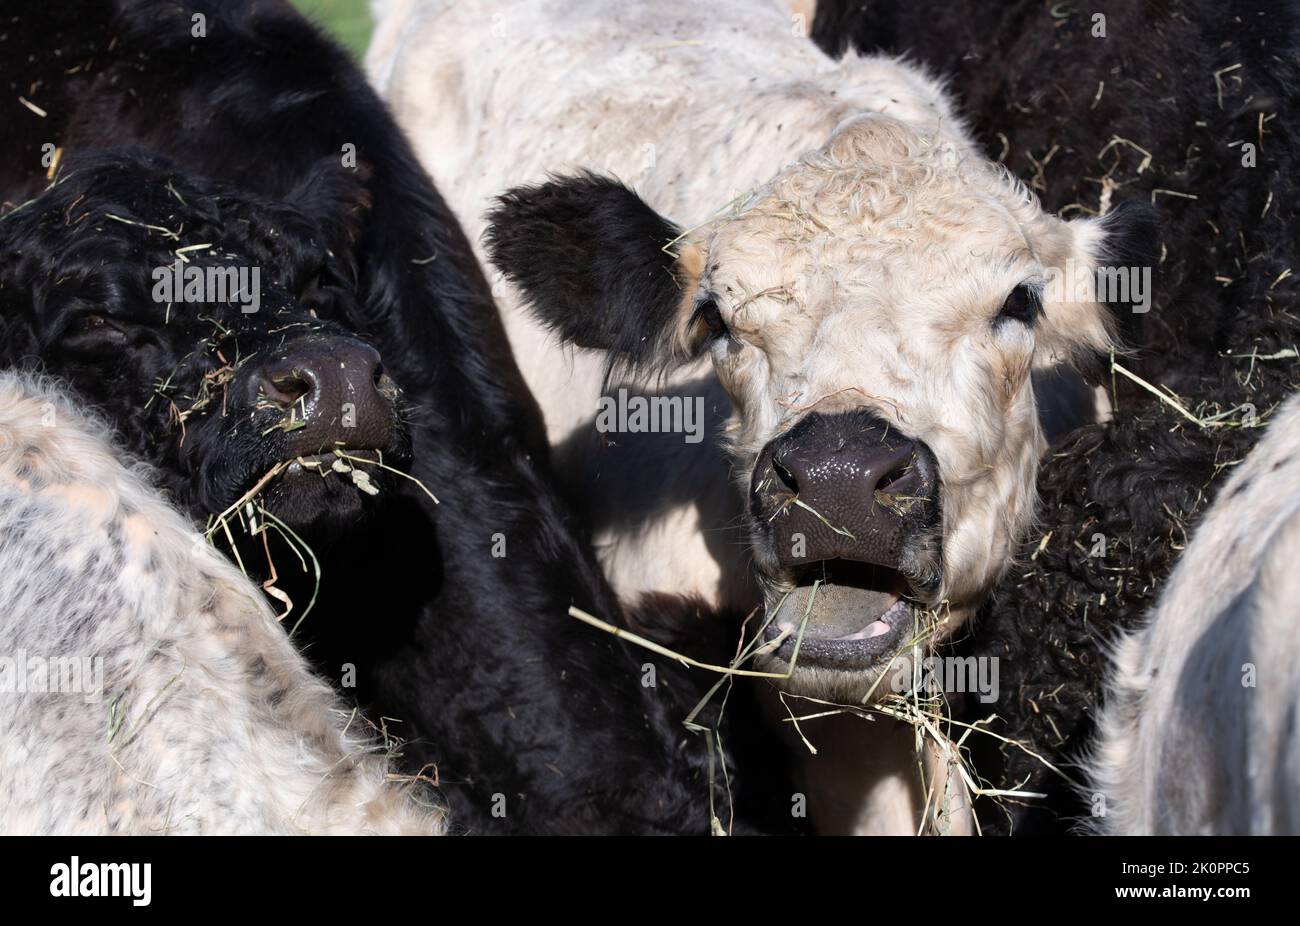 Several young Angus cattle in black and white stand close together. A white ox opens its mouth to roar. Stock Photo